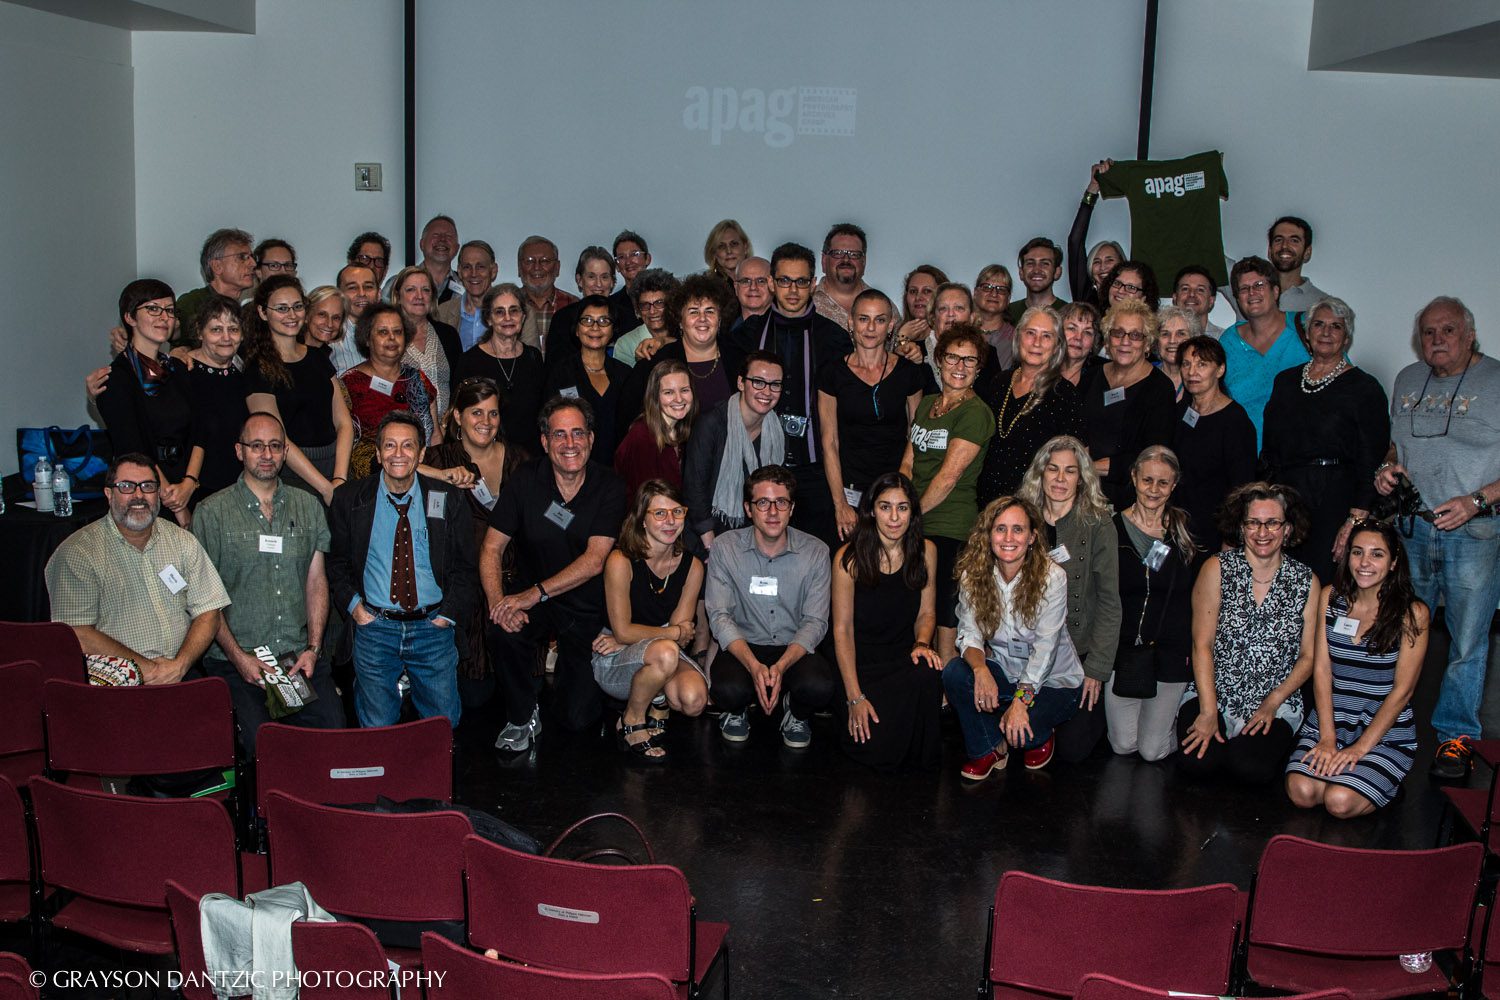 Attendees at the annual APAG seminar held at the International Center for Photography, September 18-19, 2015